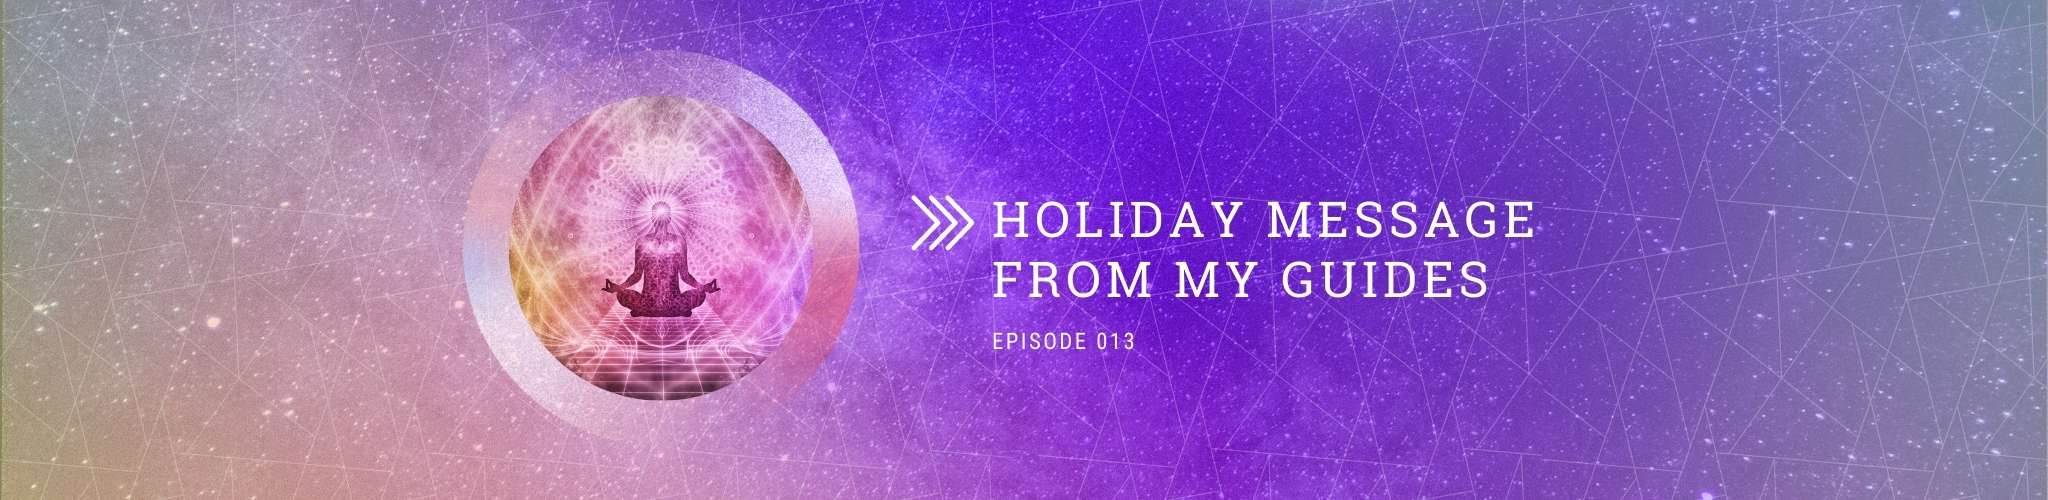 13 Holiday Guide Banner